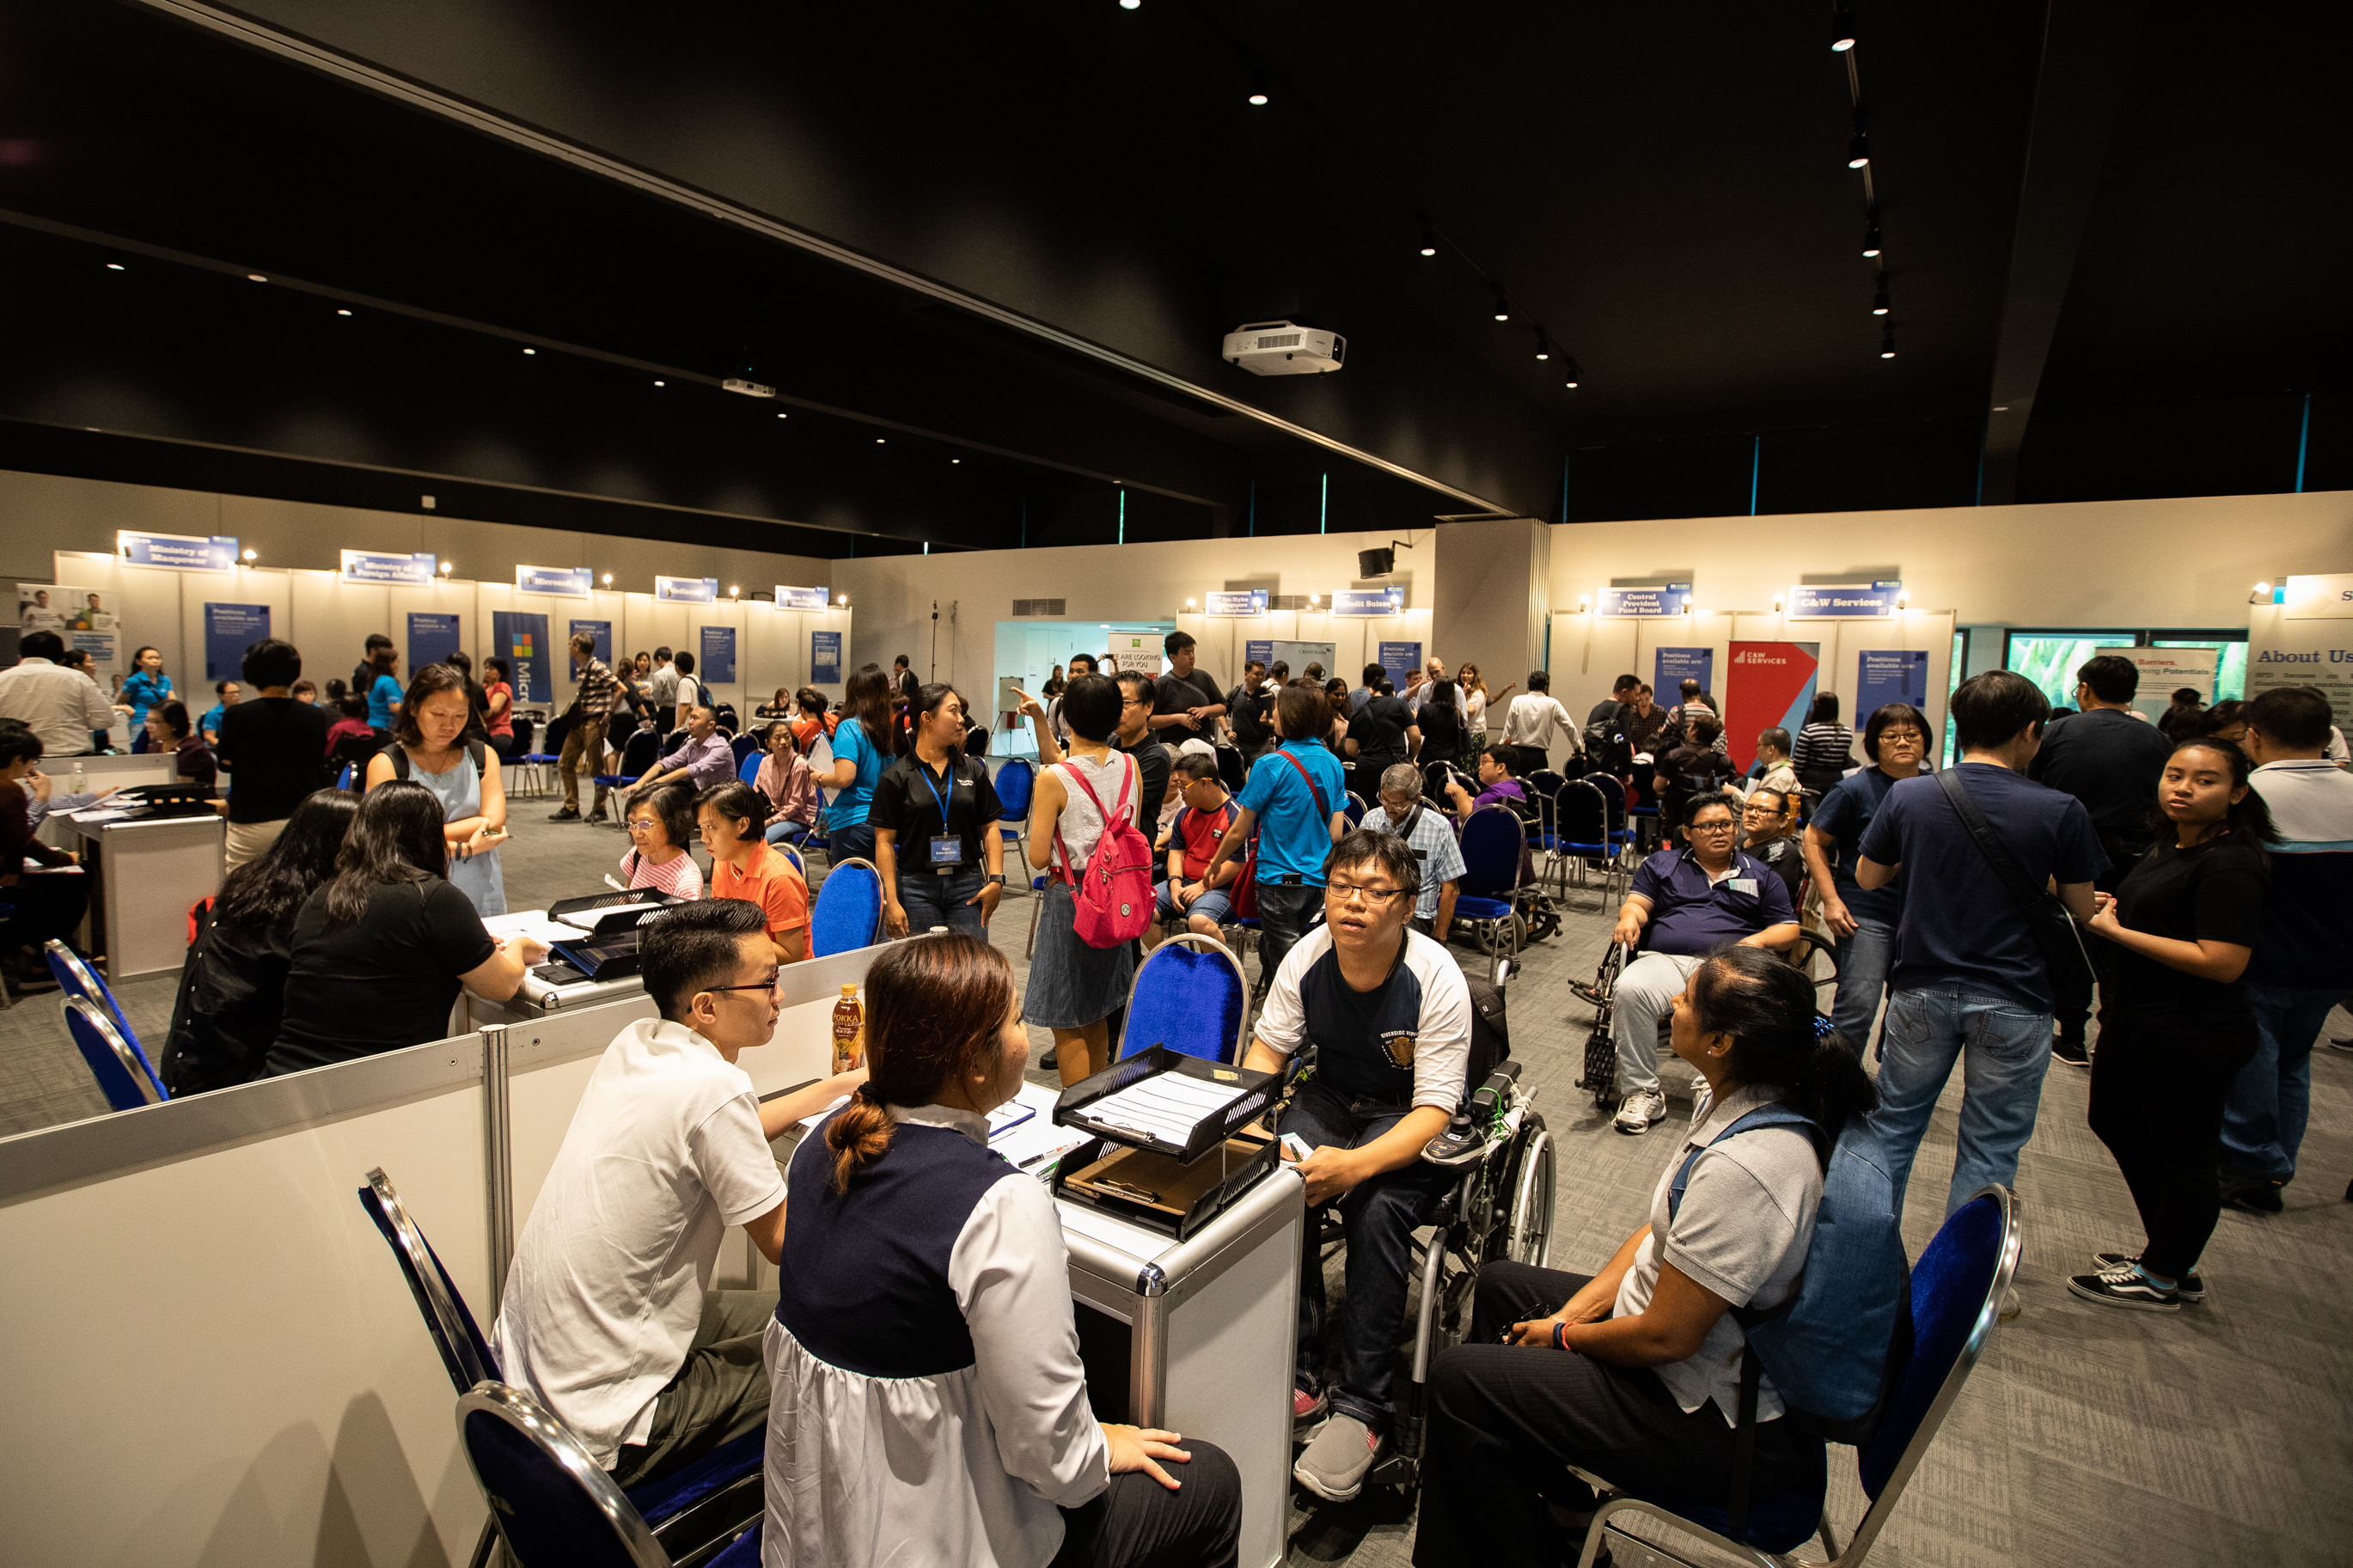 A crowd shot taken at the SG Enable Training & Career Fair 2019.